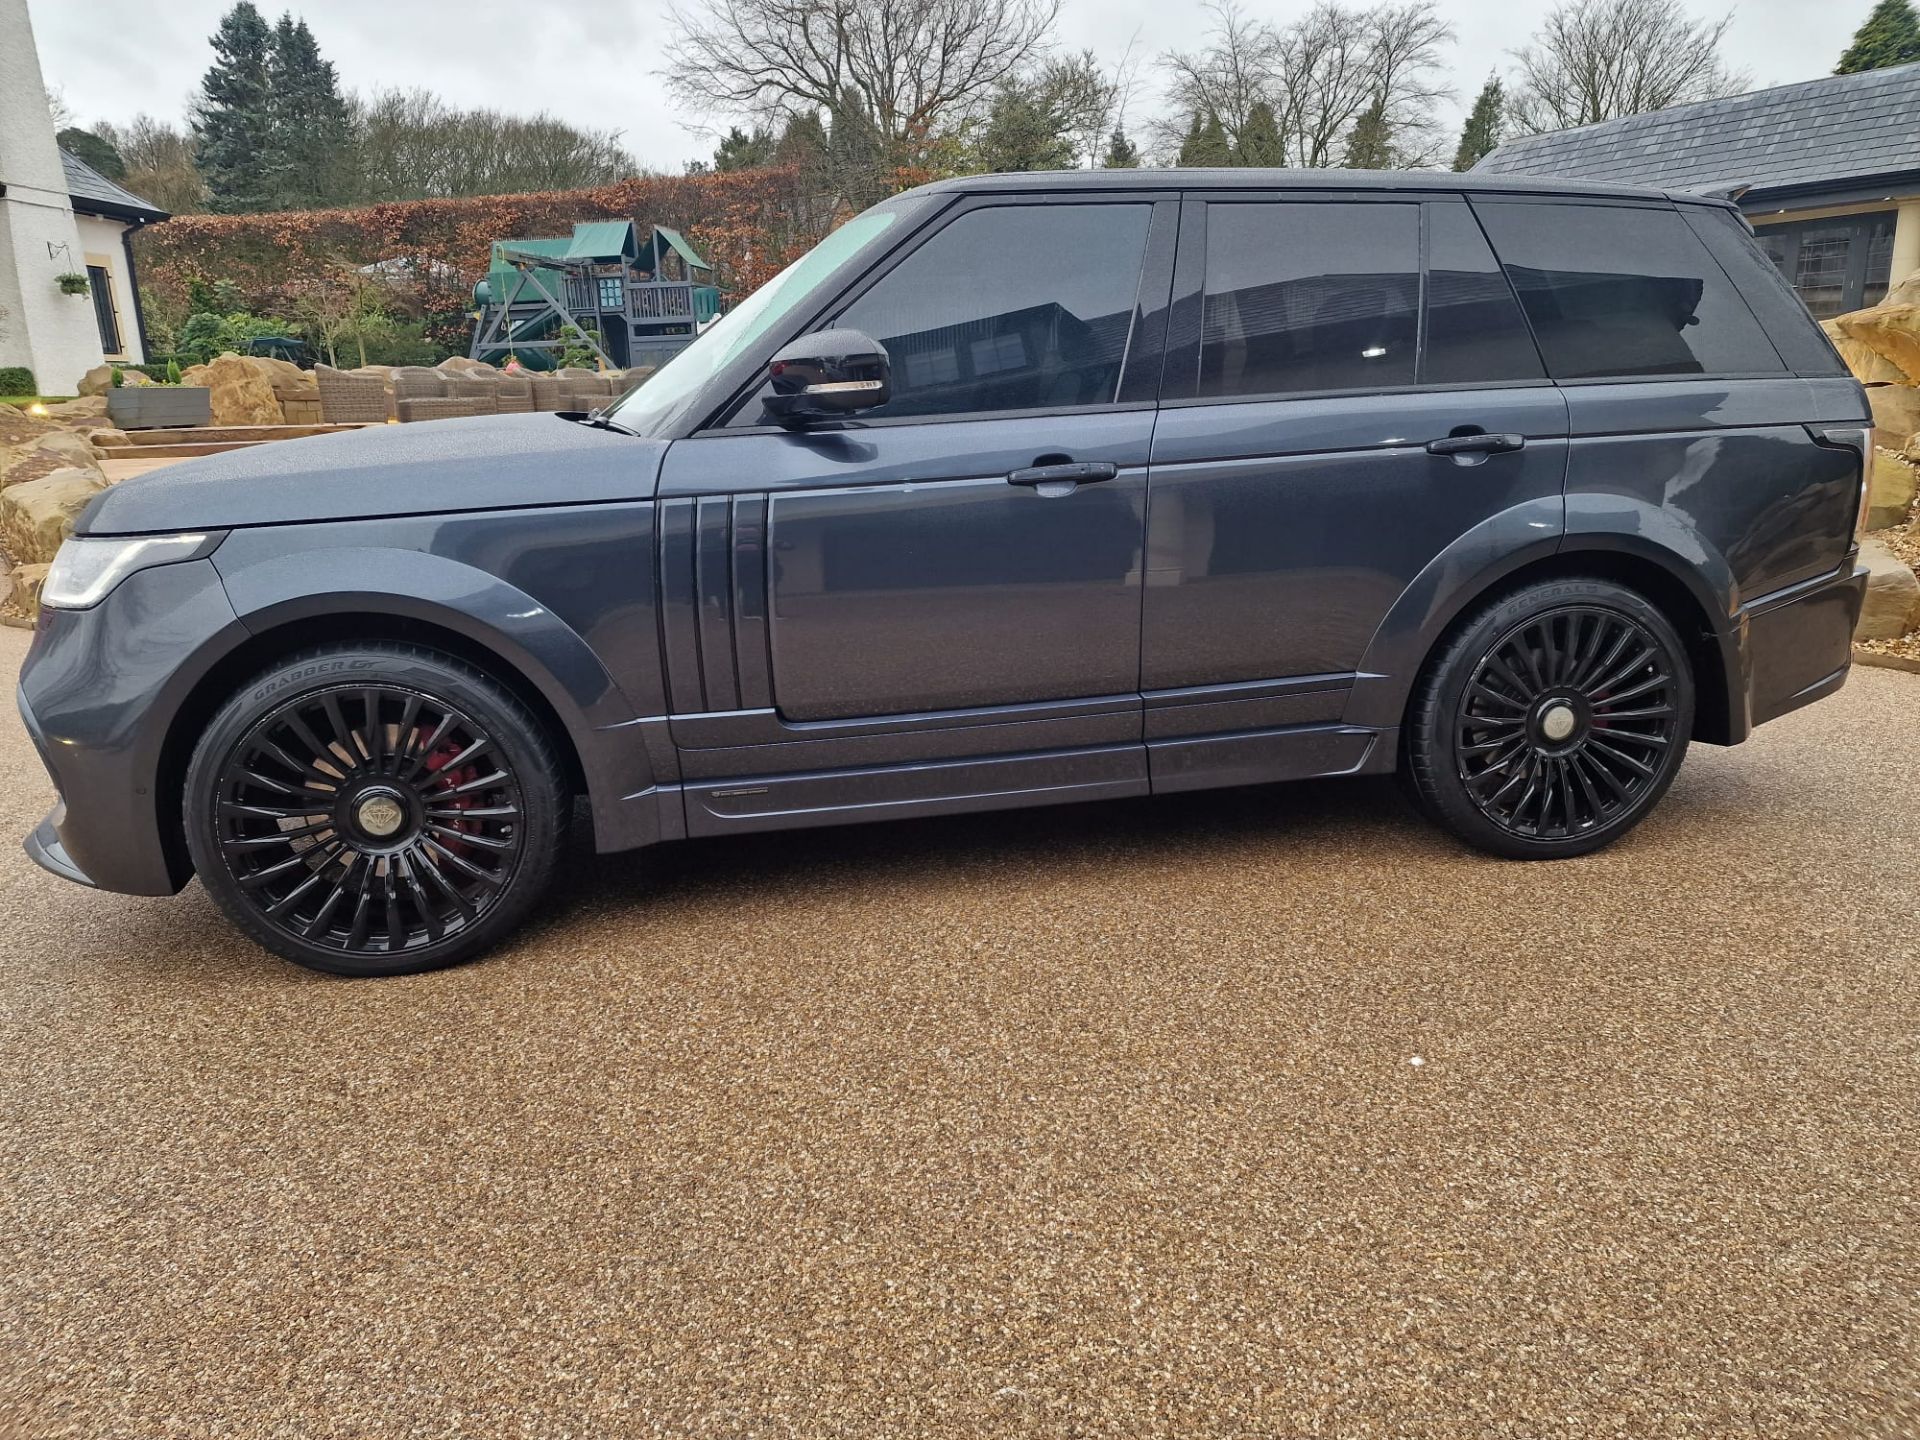 2018/68 RANGE ROVER SV AUTOBIOGRAPHY DYN V8 SC AUTO - £40K WORTH OF ONYX BODY KIT AND CONVERSION - Image 10 of 77